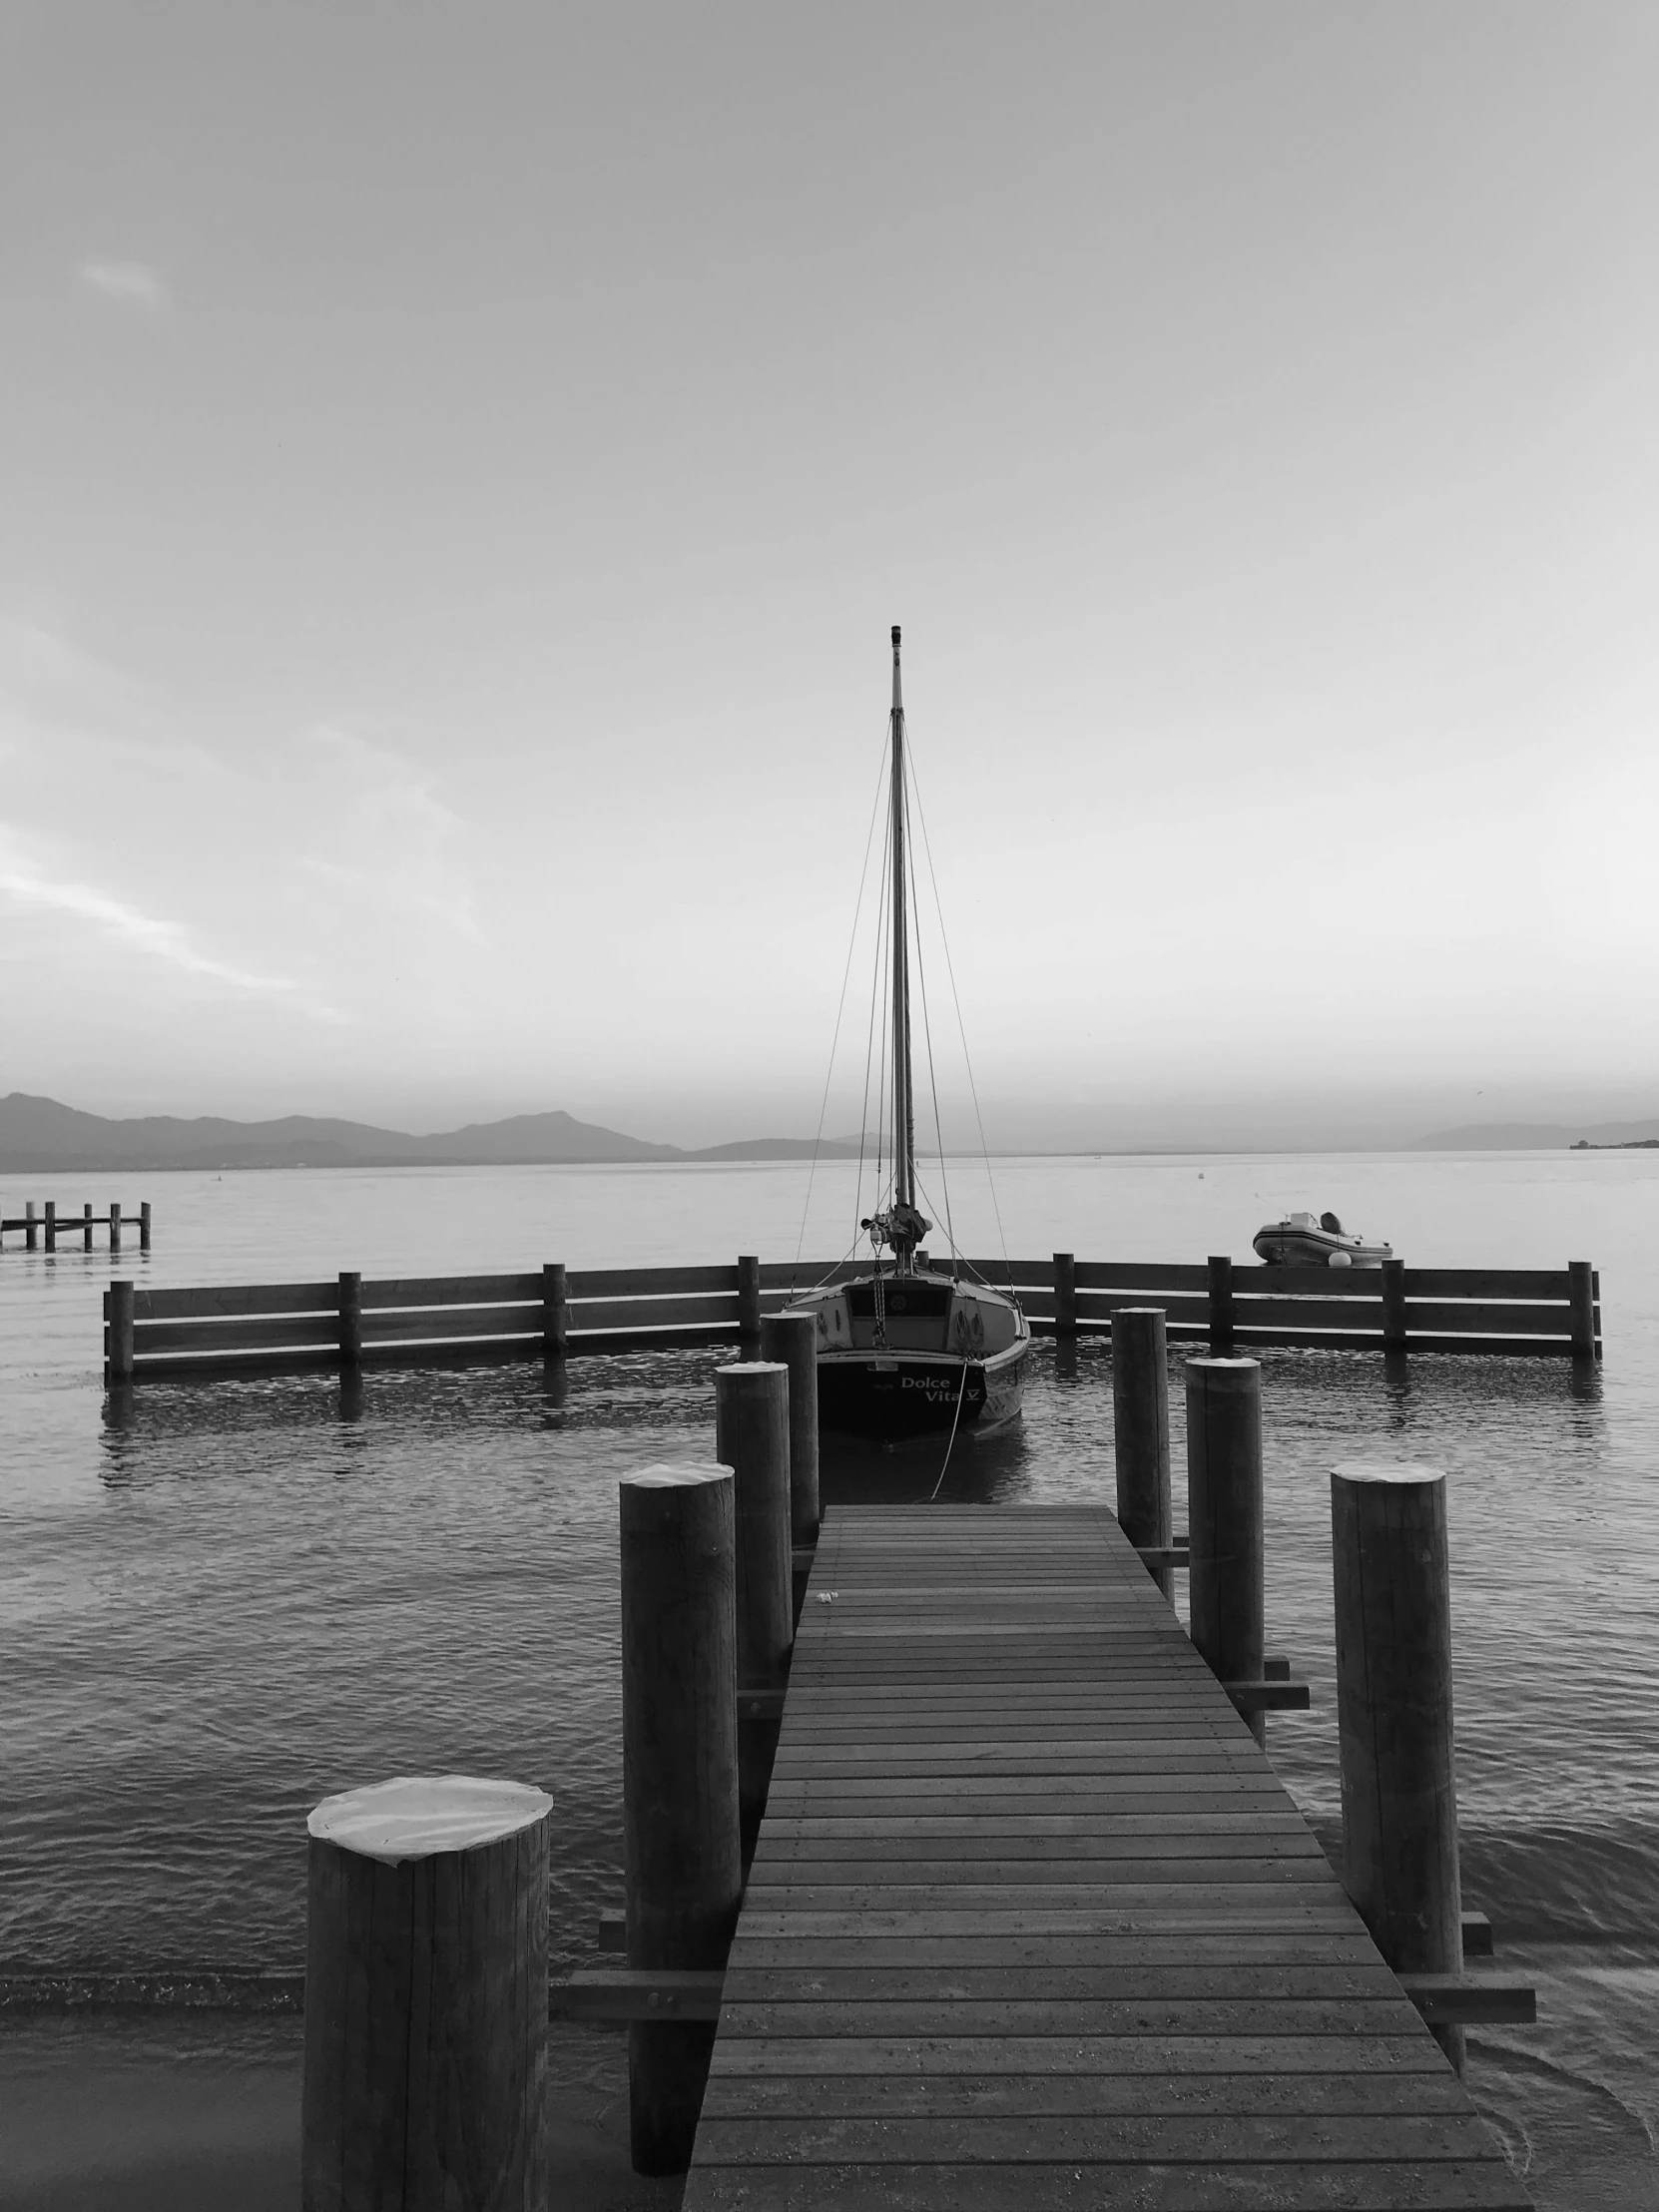 the dock is surrounded by a few poles and two boats